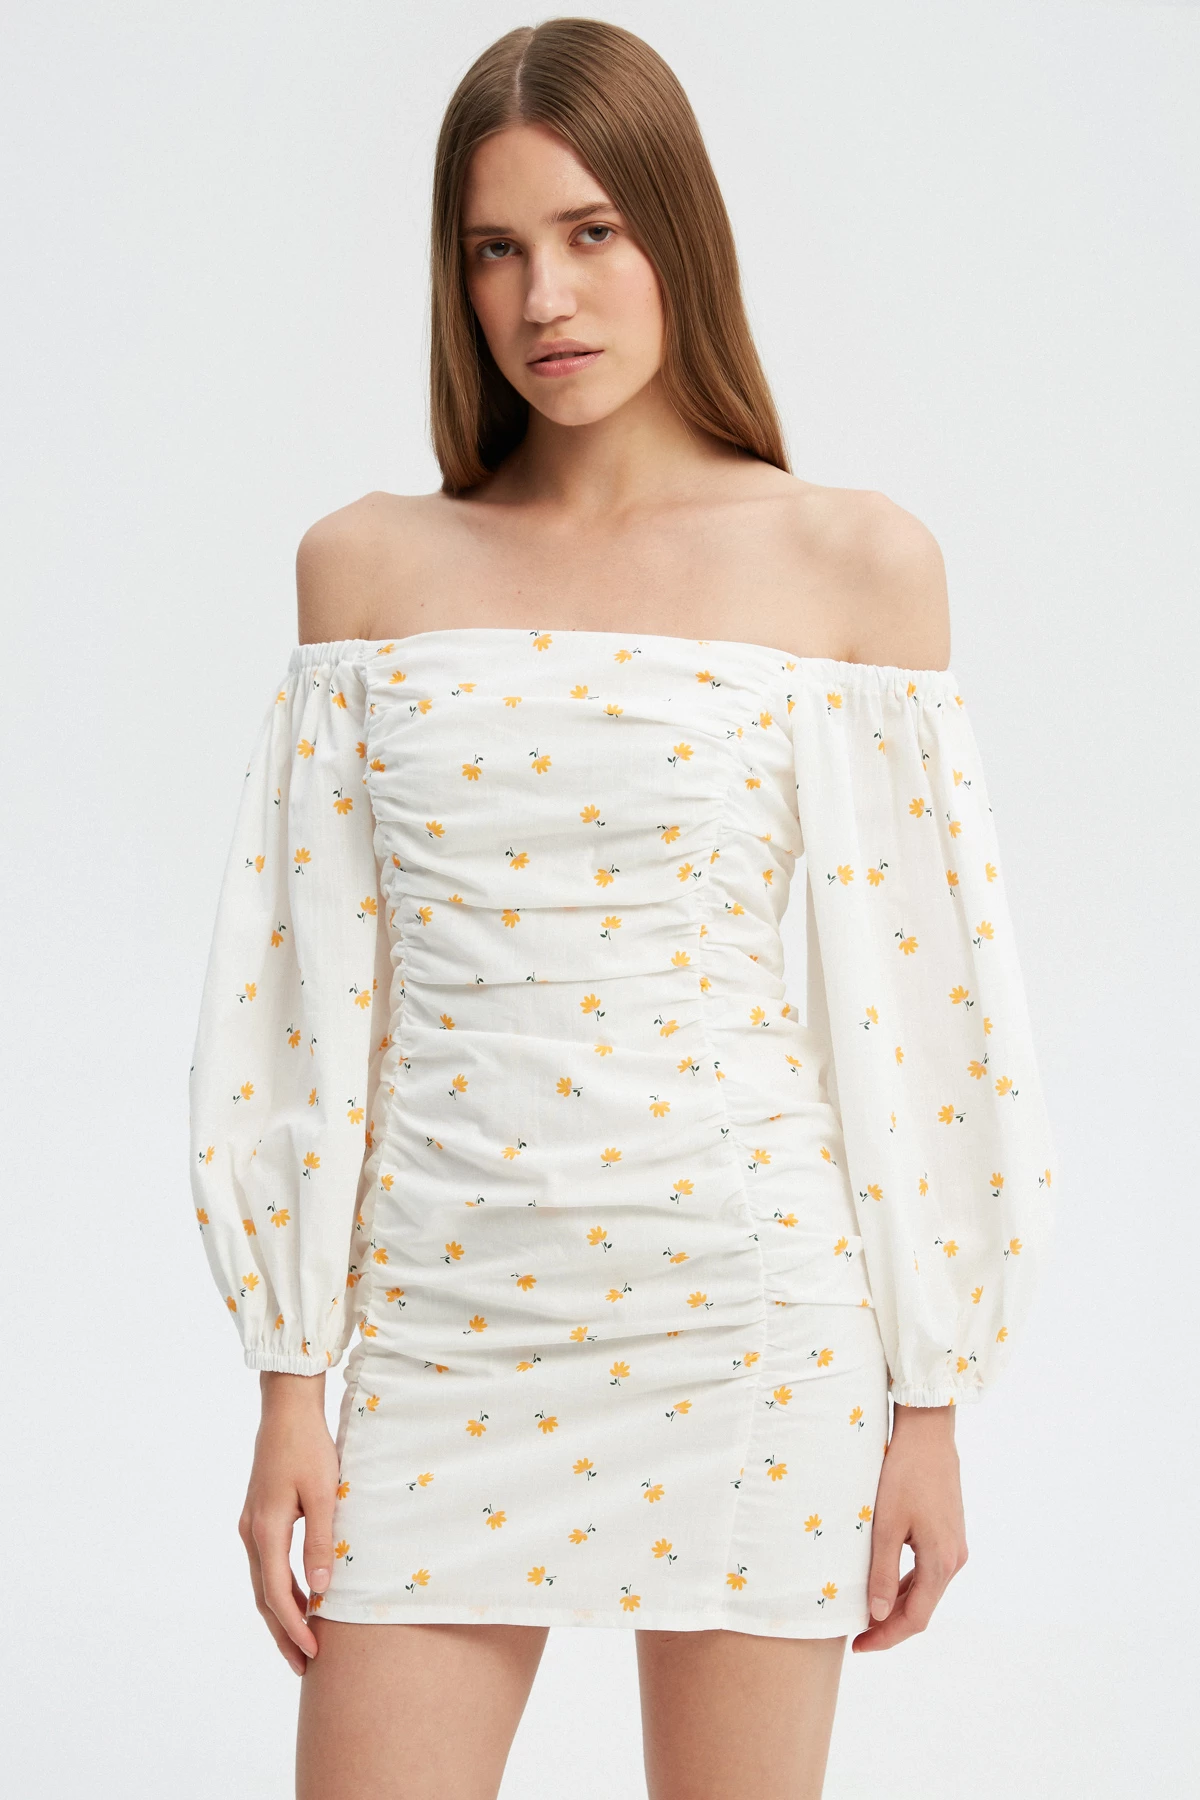 White cotton drapered dress with yellow flowers print, photo 1